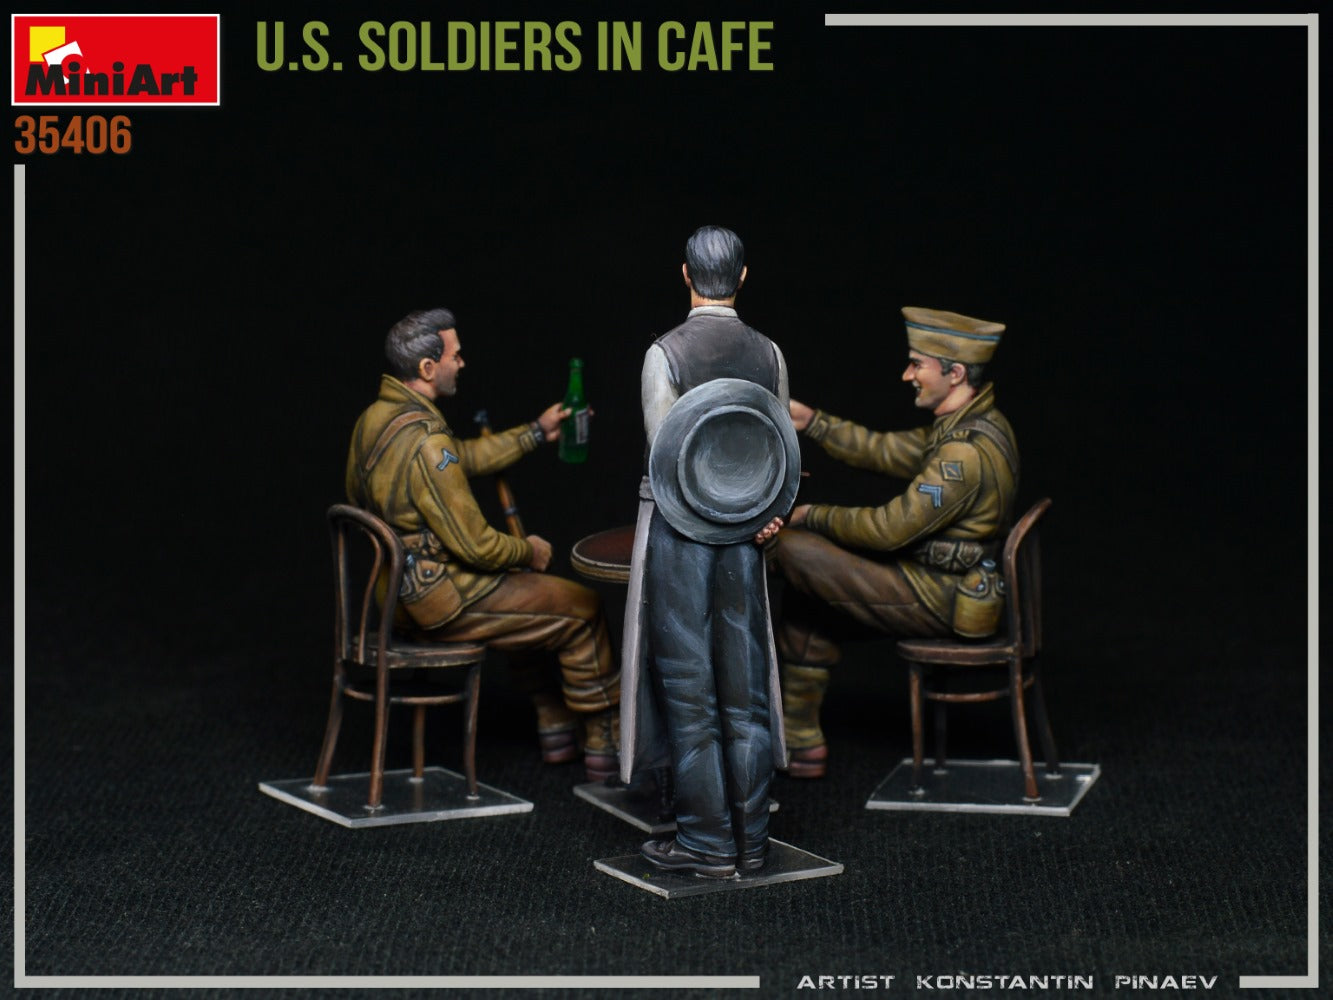 Miniart 1/35 WW2 US Soldiers in Cafe diorama model kit